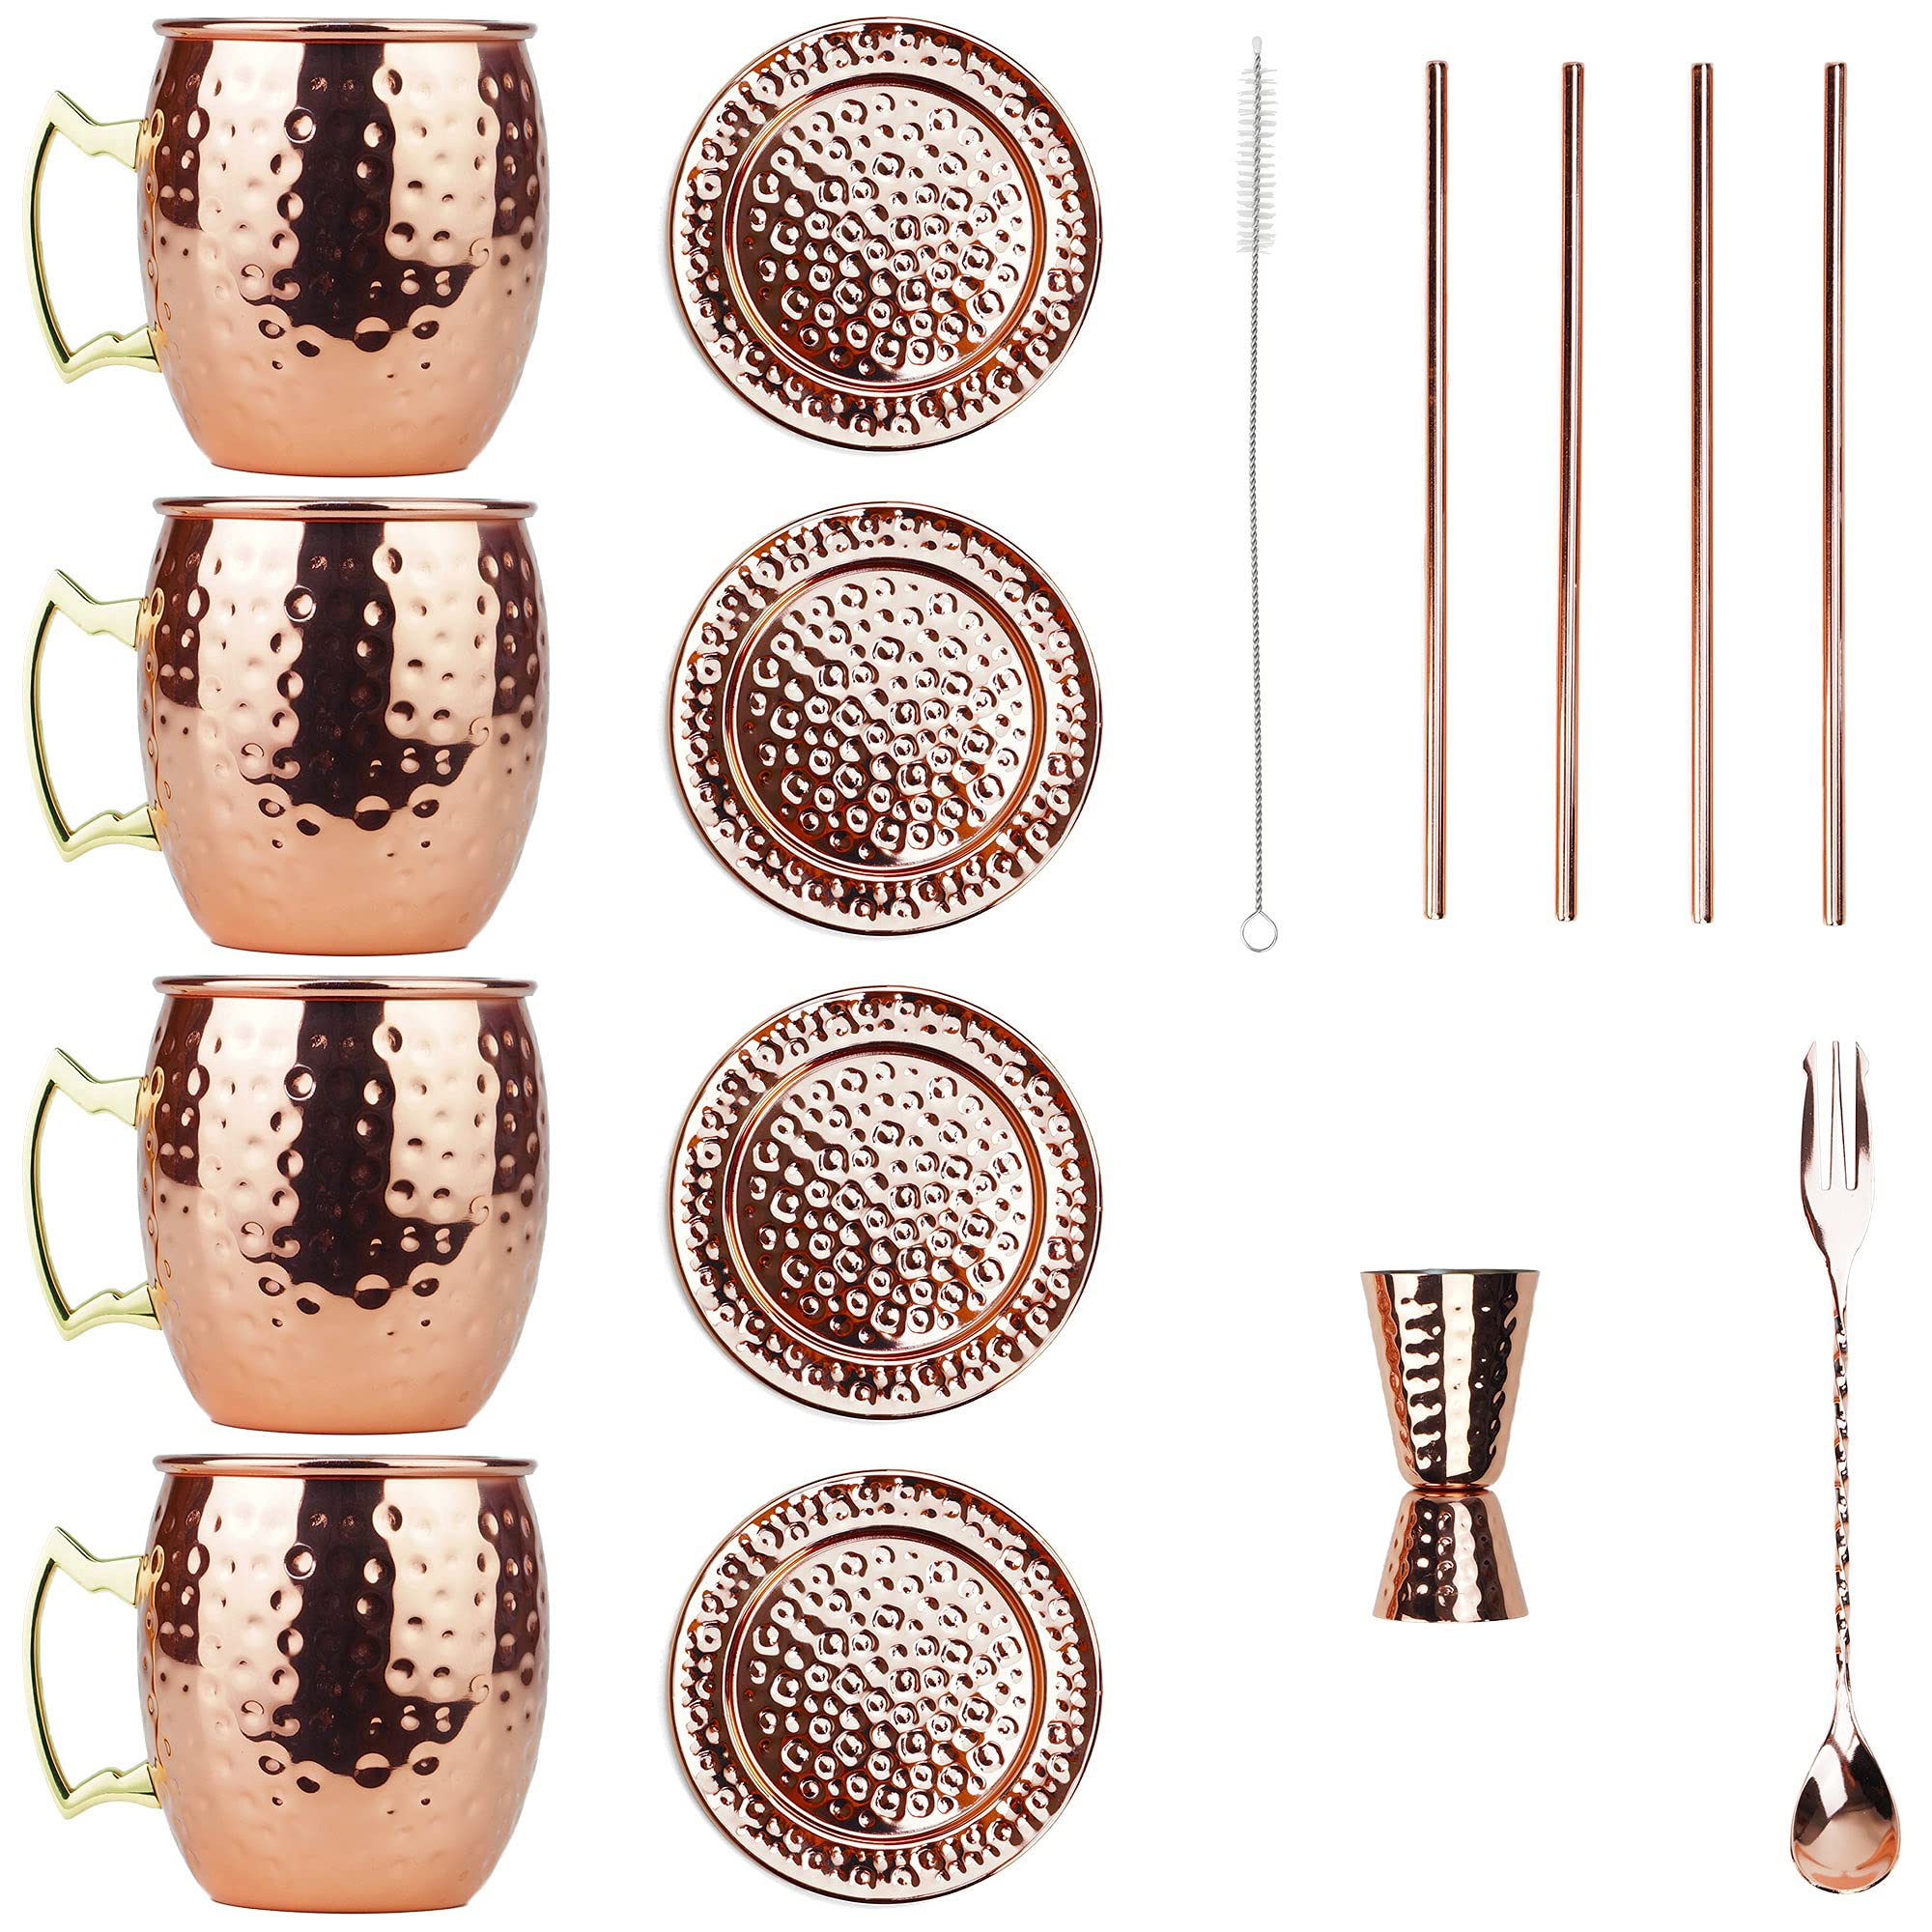 PG Moscow Mule/Cocktail Bar Set, 15-pc Copper/Rose Gold Color, High Grade SS, w/4x Moscow Mule Mugs, 4x Straws w/cleaner, 4x REAL STAINLESS Coasters, 1x Double-Jigger 1x Double-head Stirrer